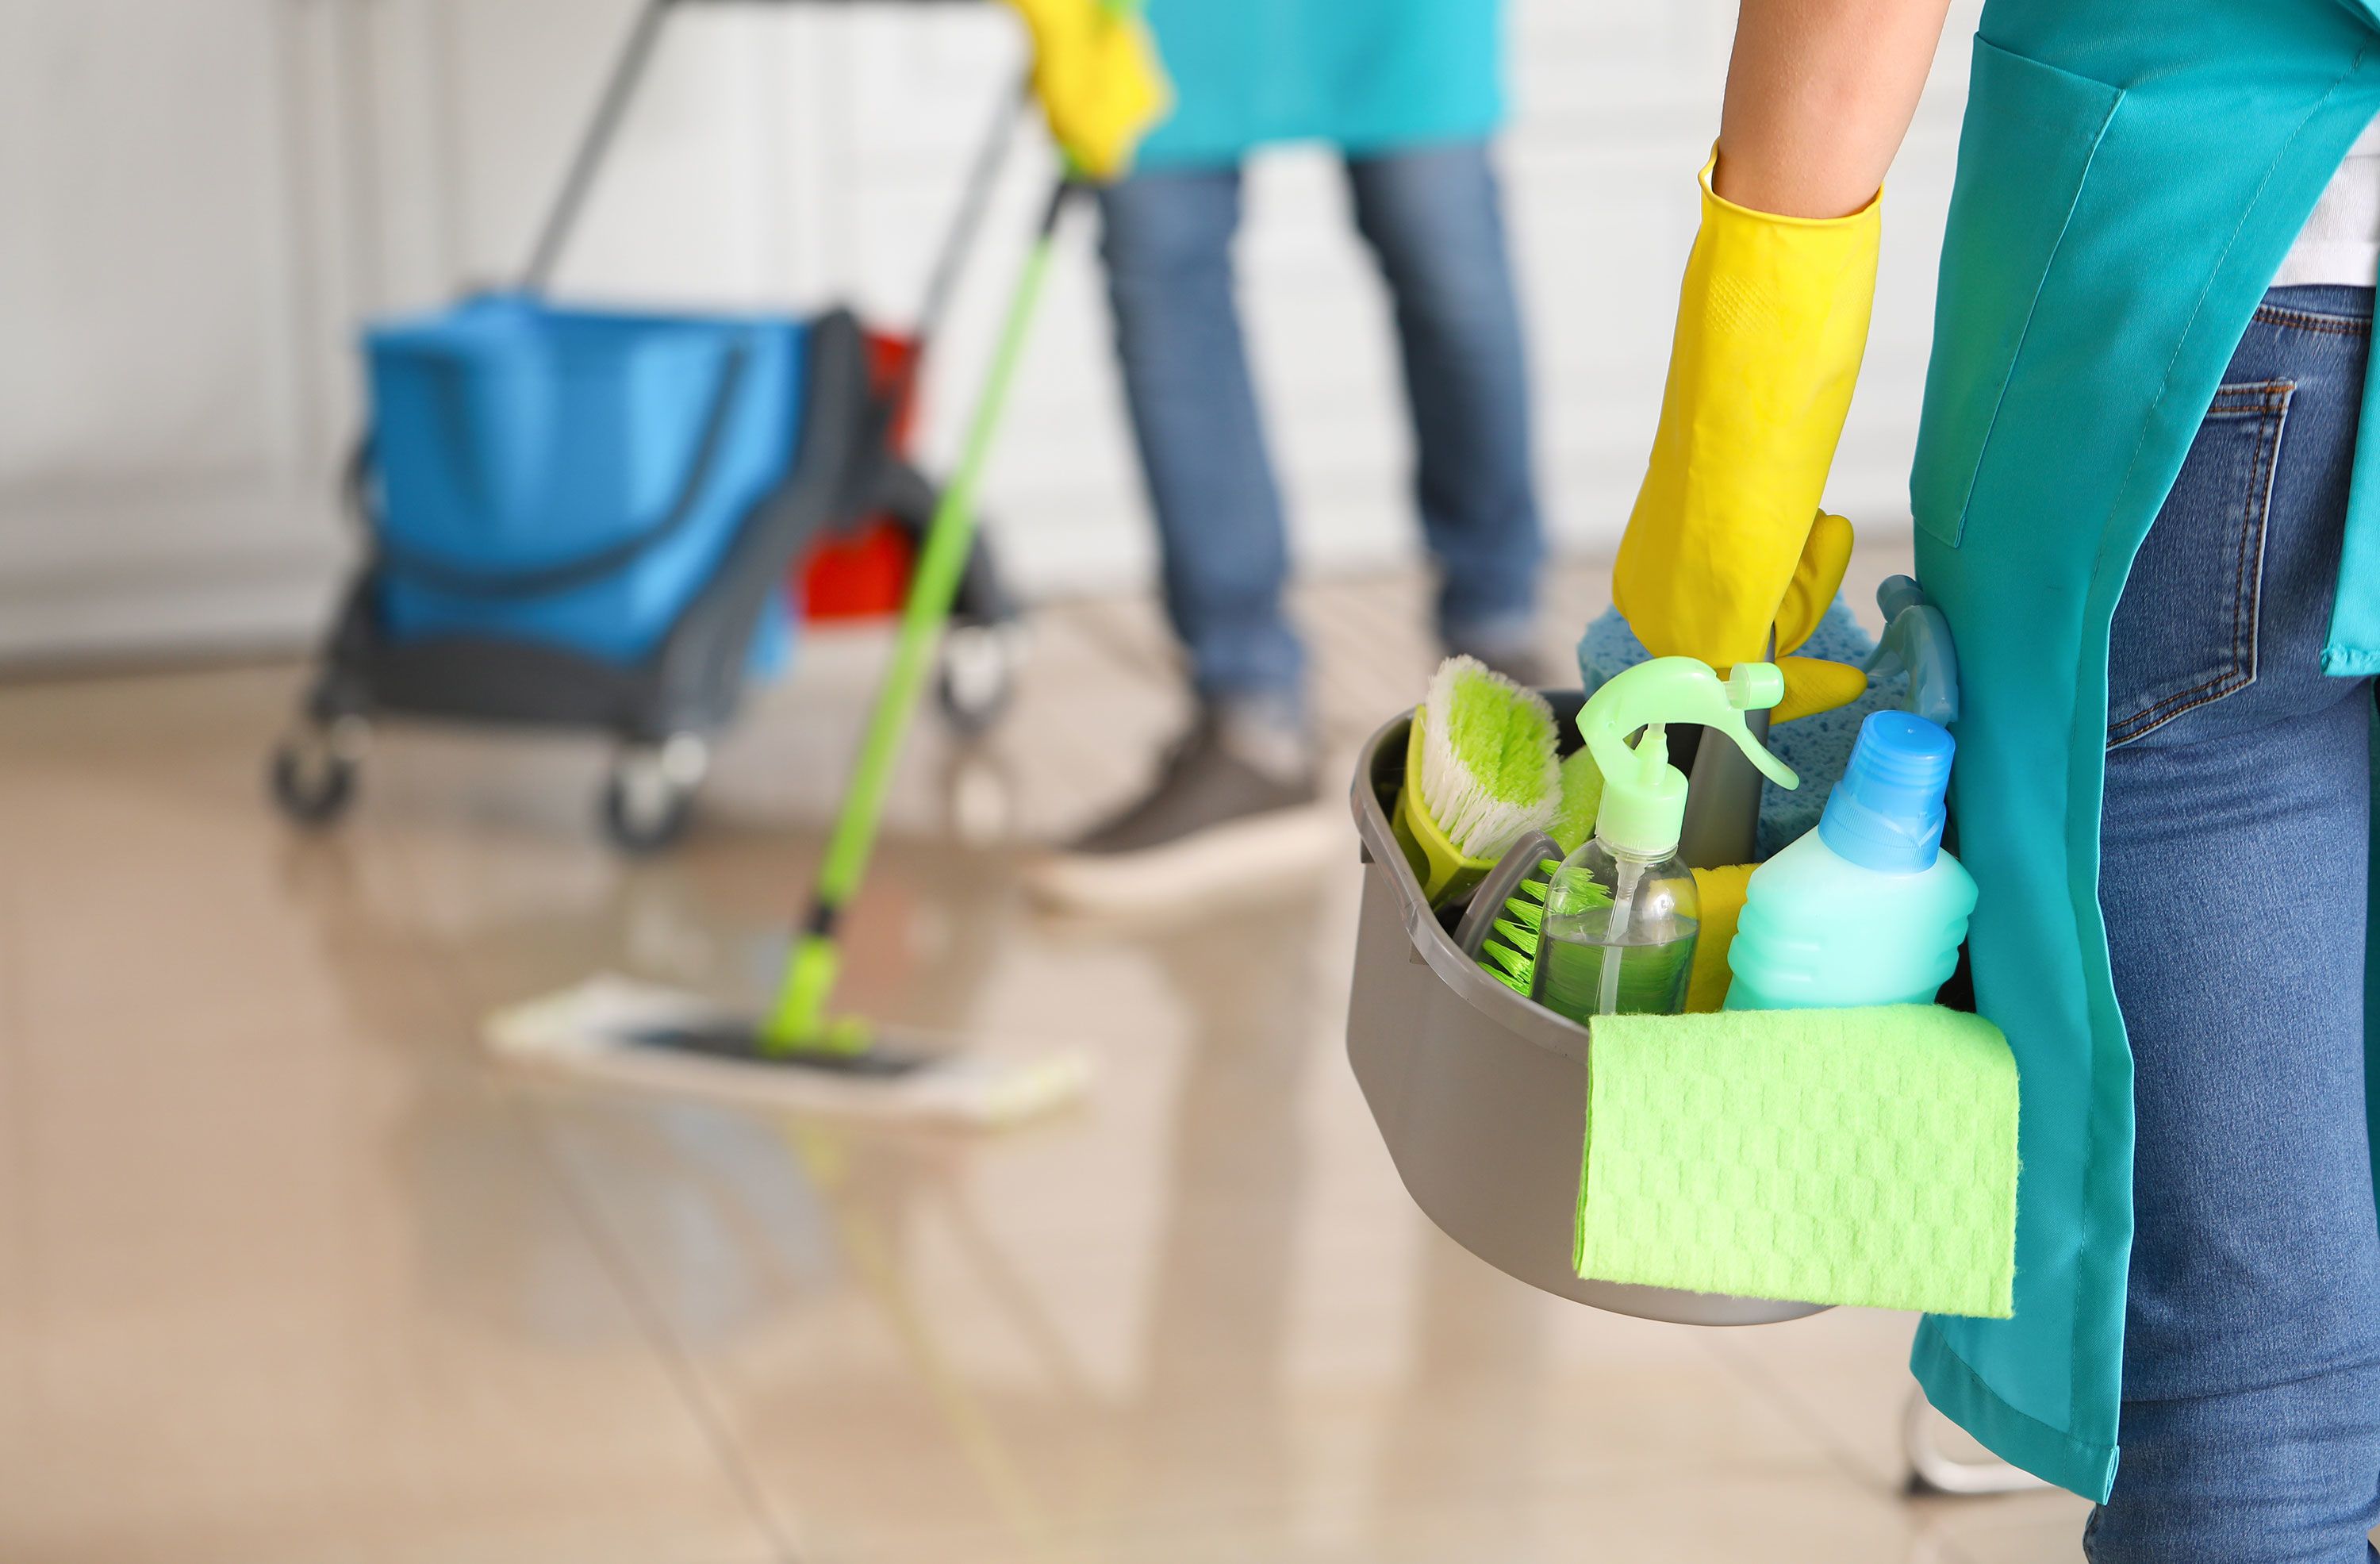 The coronavirus pandemic has been catastrophic for house cleaners